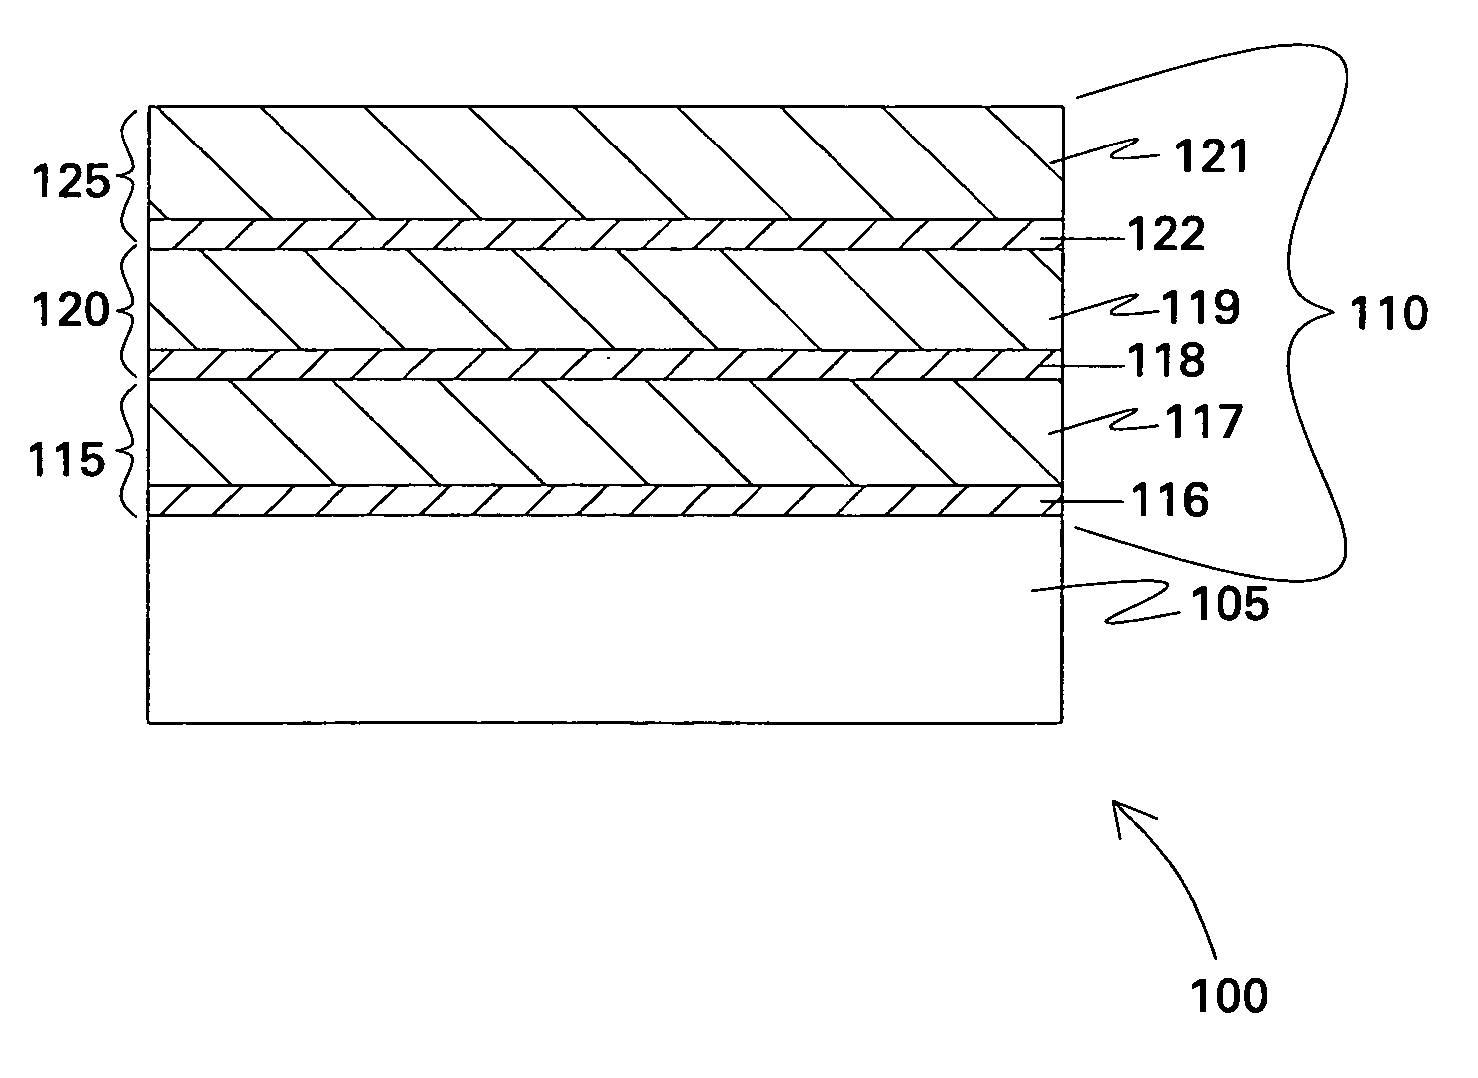 Multilayered environmental barrier coating and related articles and methods